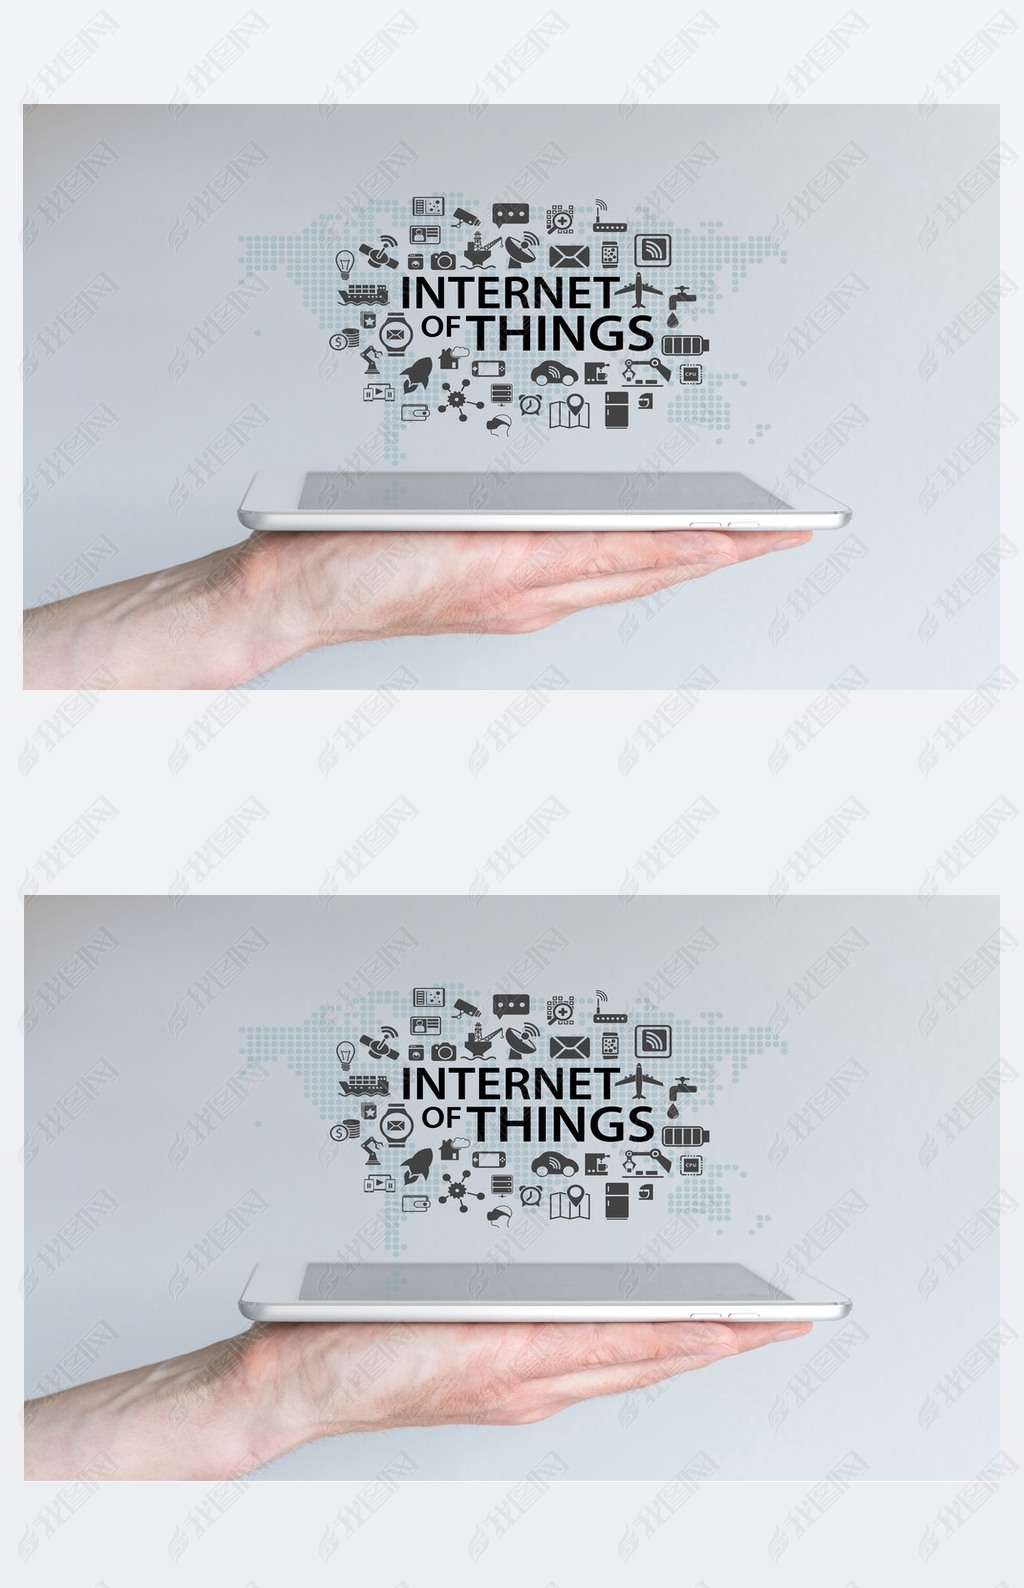 Hand holding tablet or modern art phone. Internet of things (IOT) background concept.